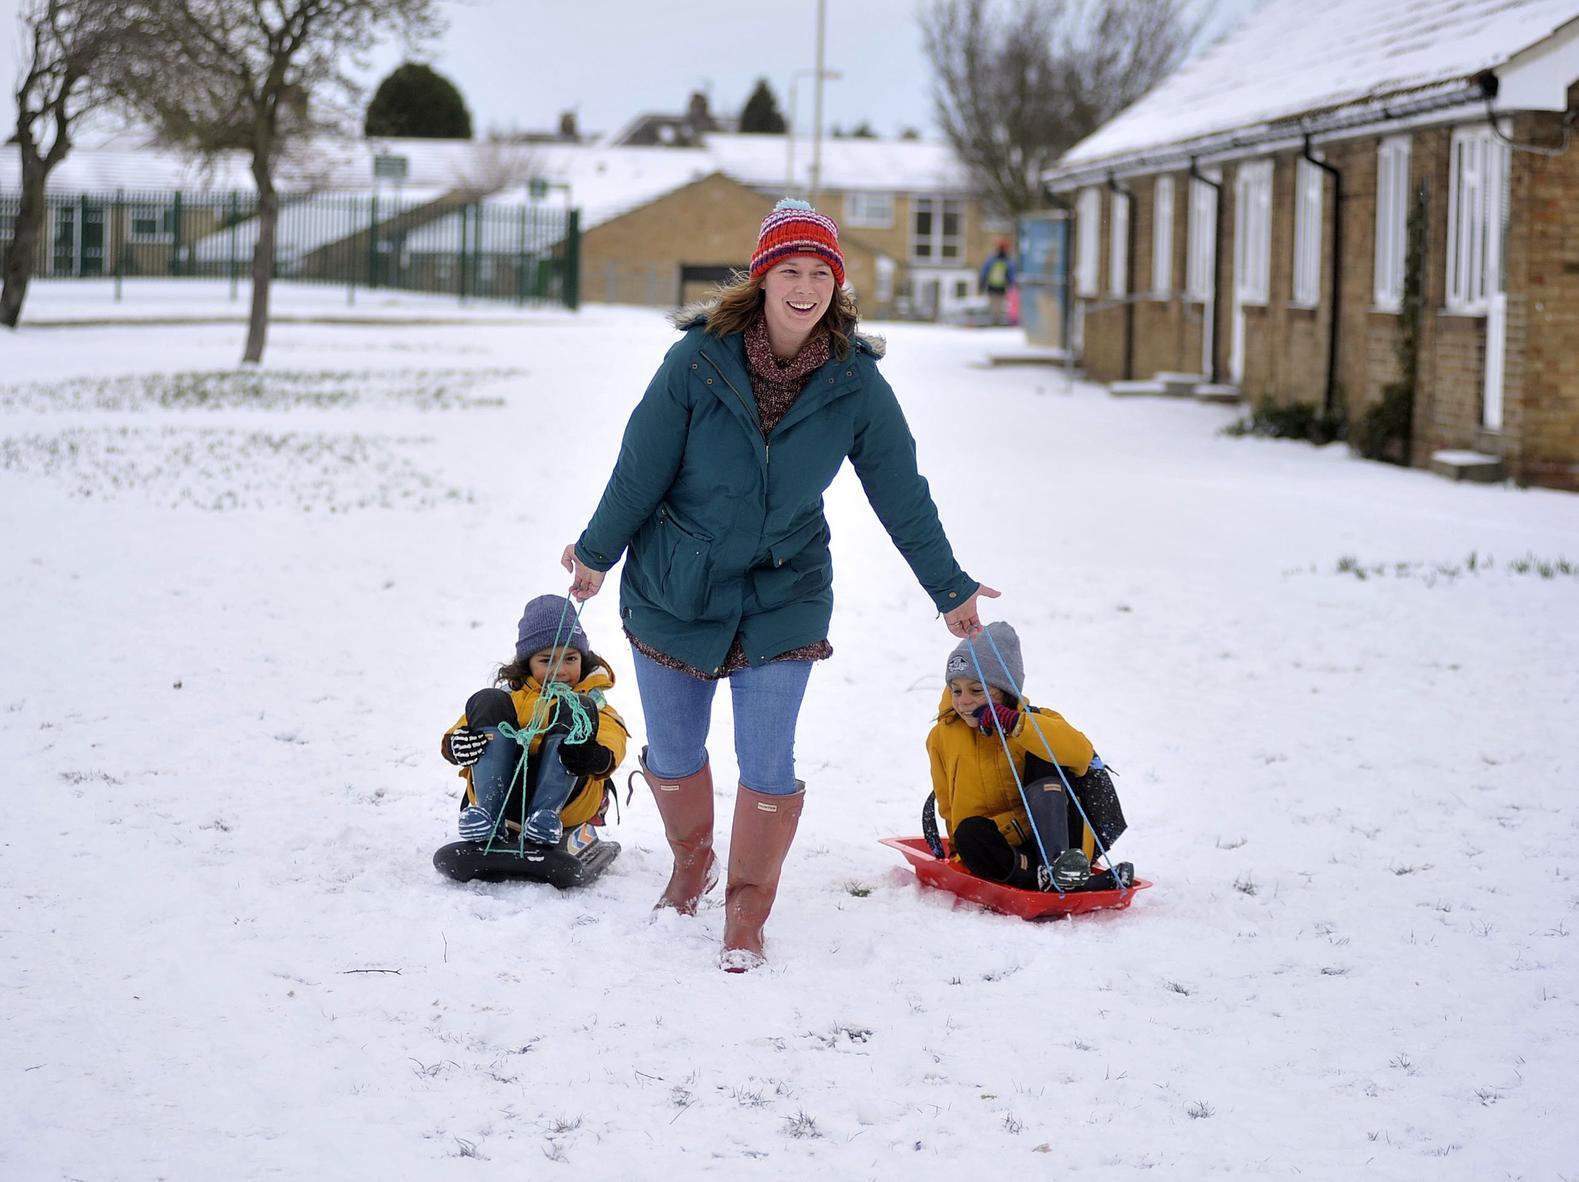 A mum takes two little ones to school on sleds.